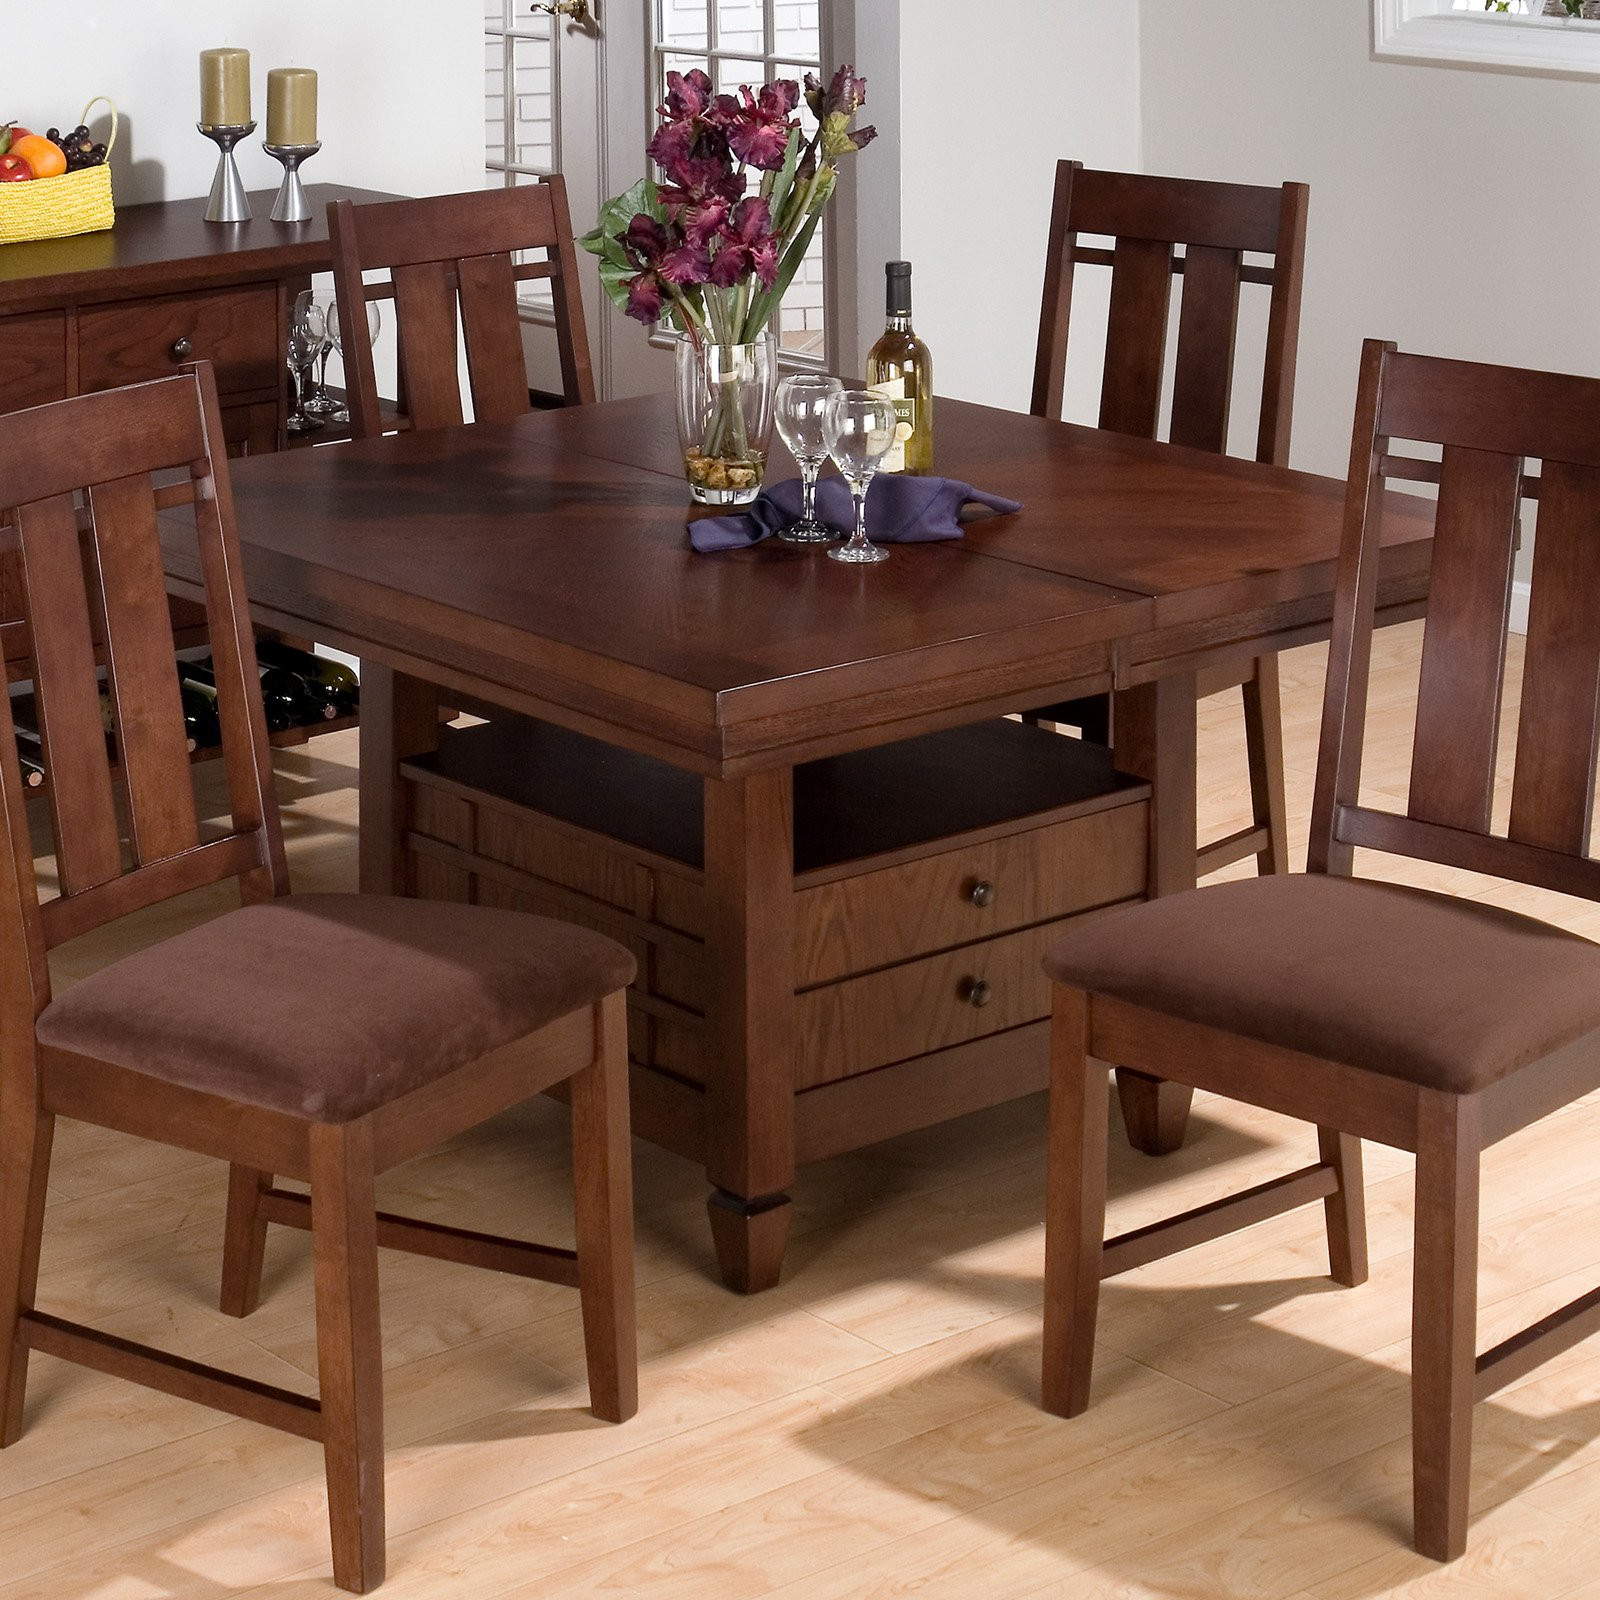 Kitchen Tables With Storage
 Montville Storage Dining Table at Hayneedle